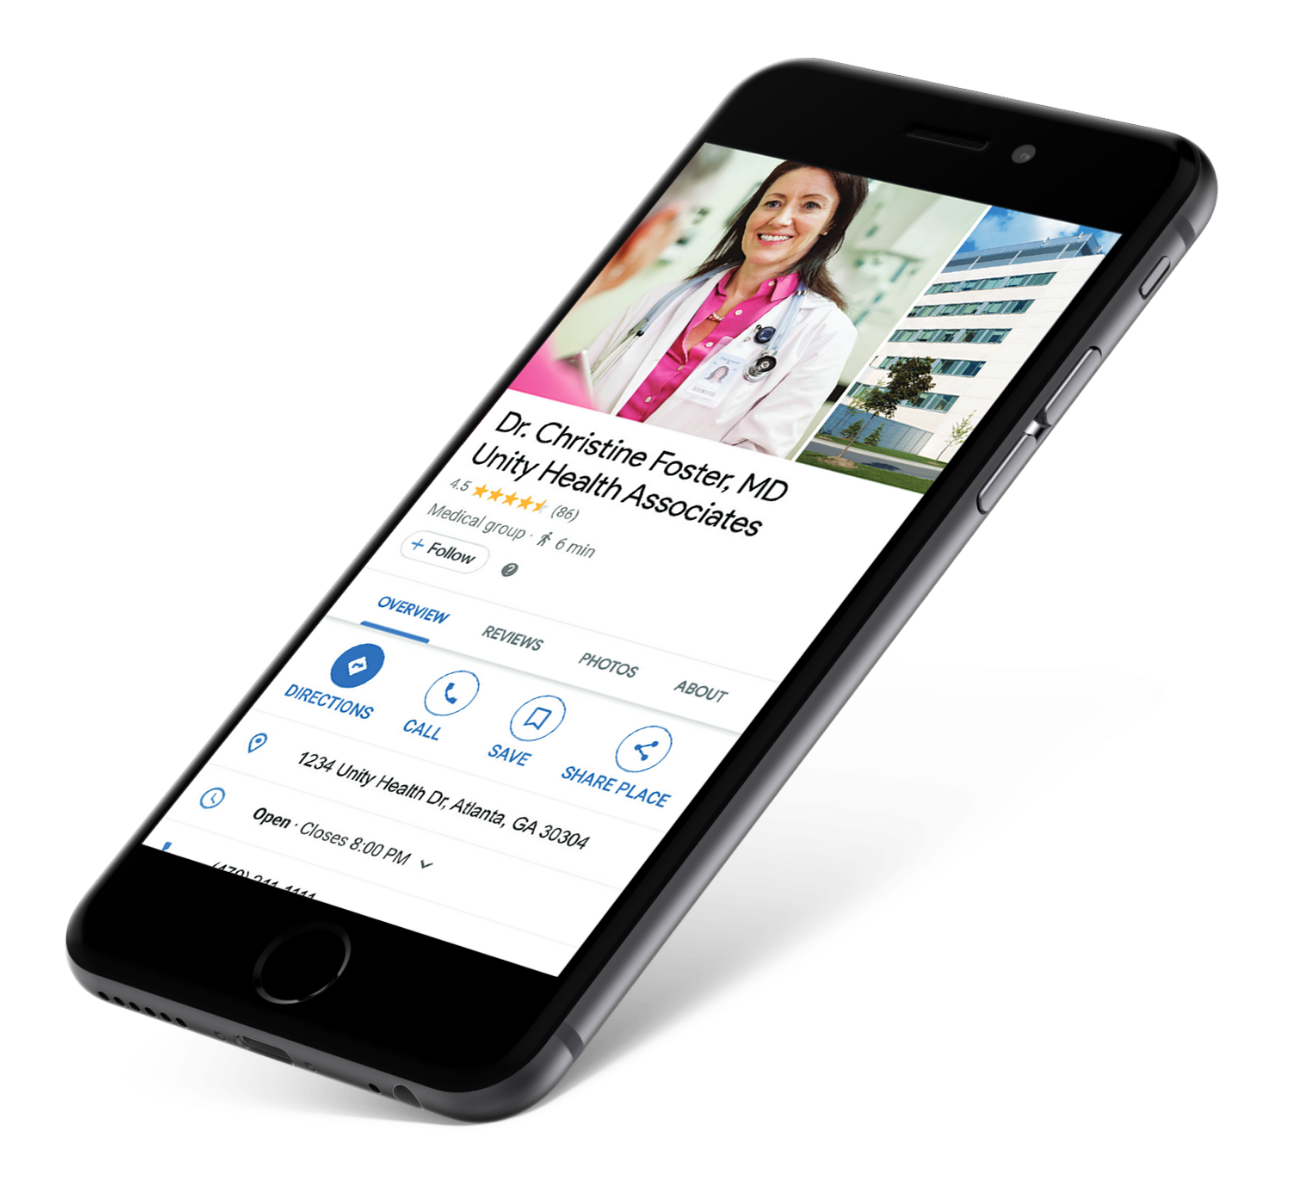 Mobile phone displaying screen from a Google My Business Listing Management solution.